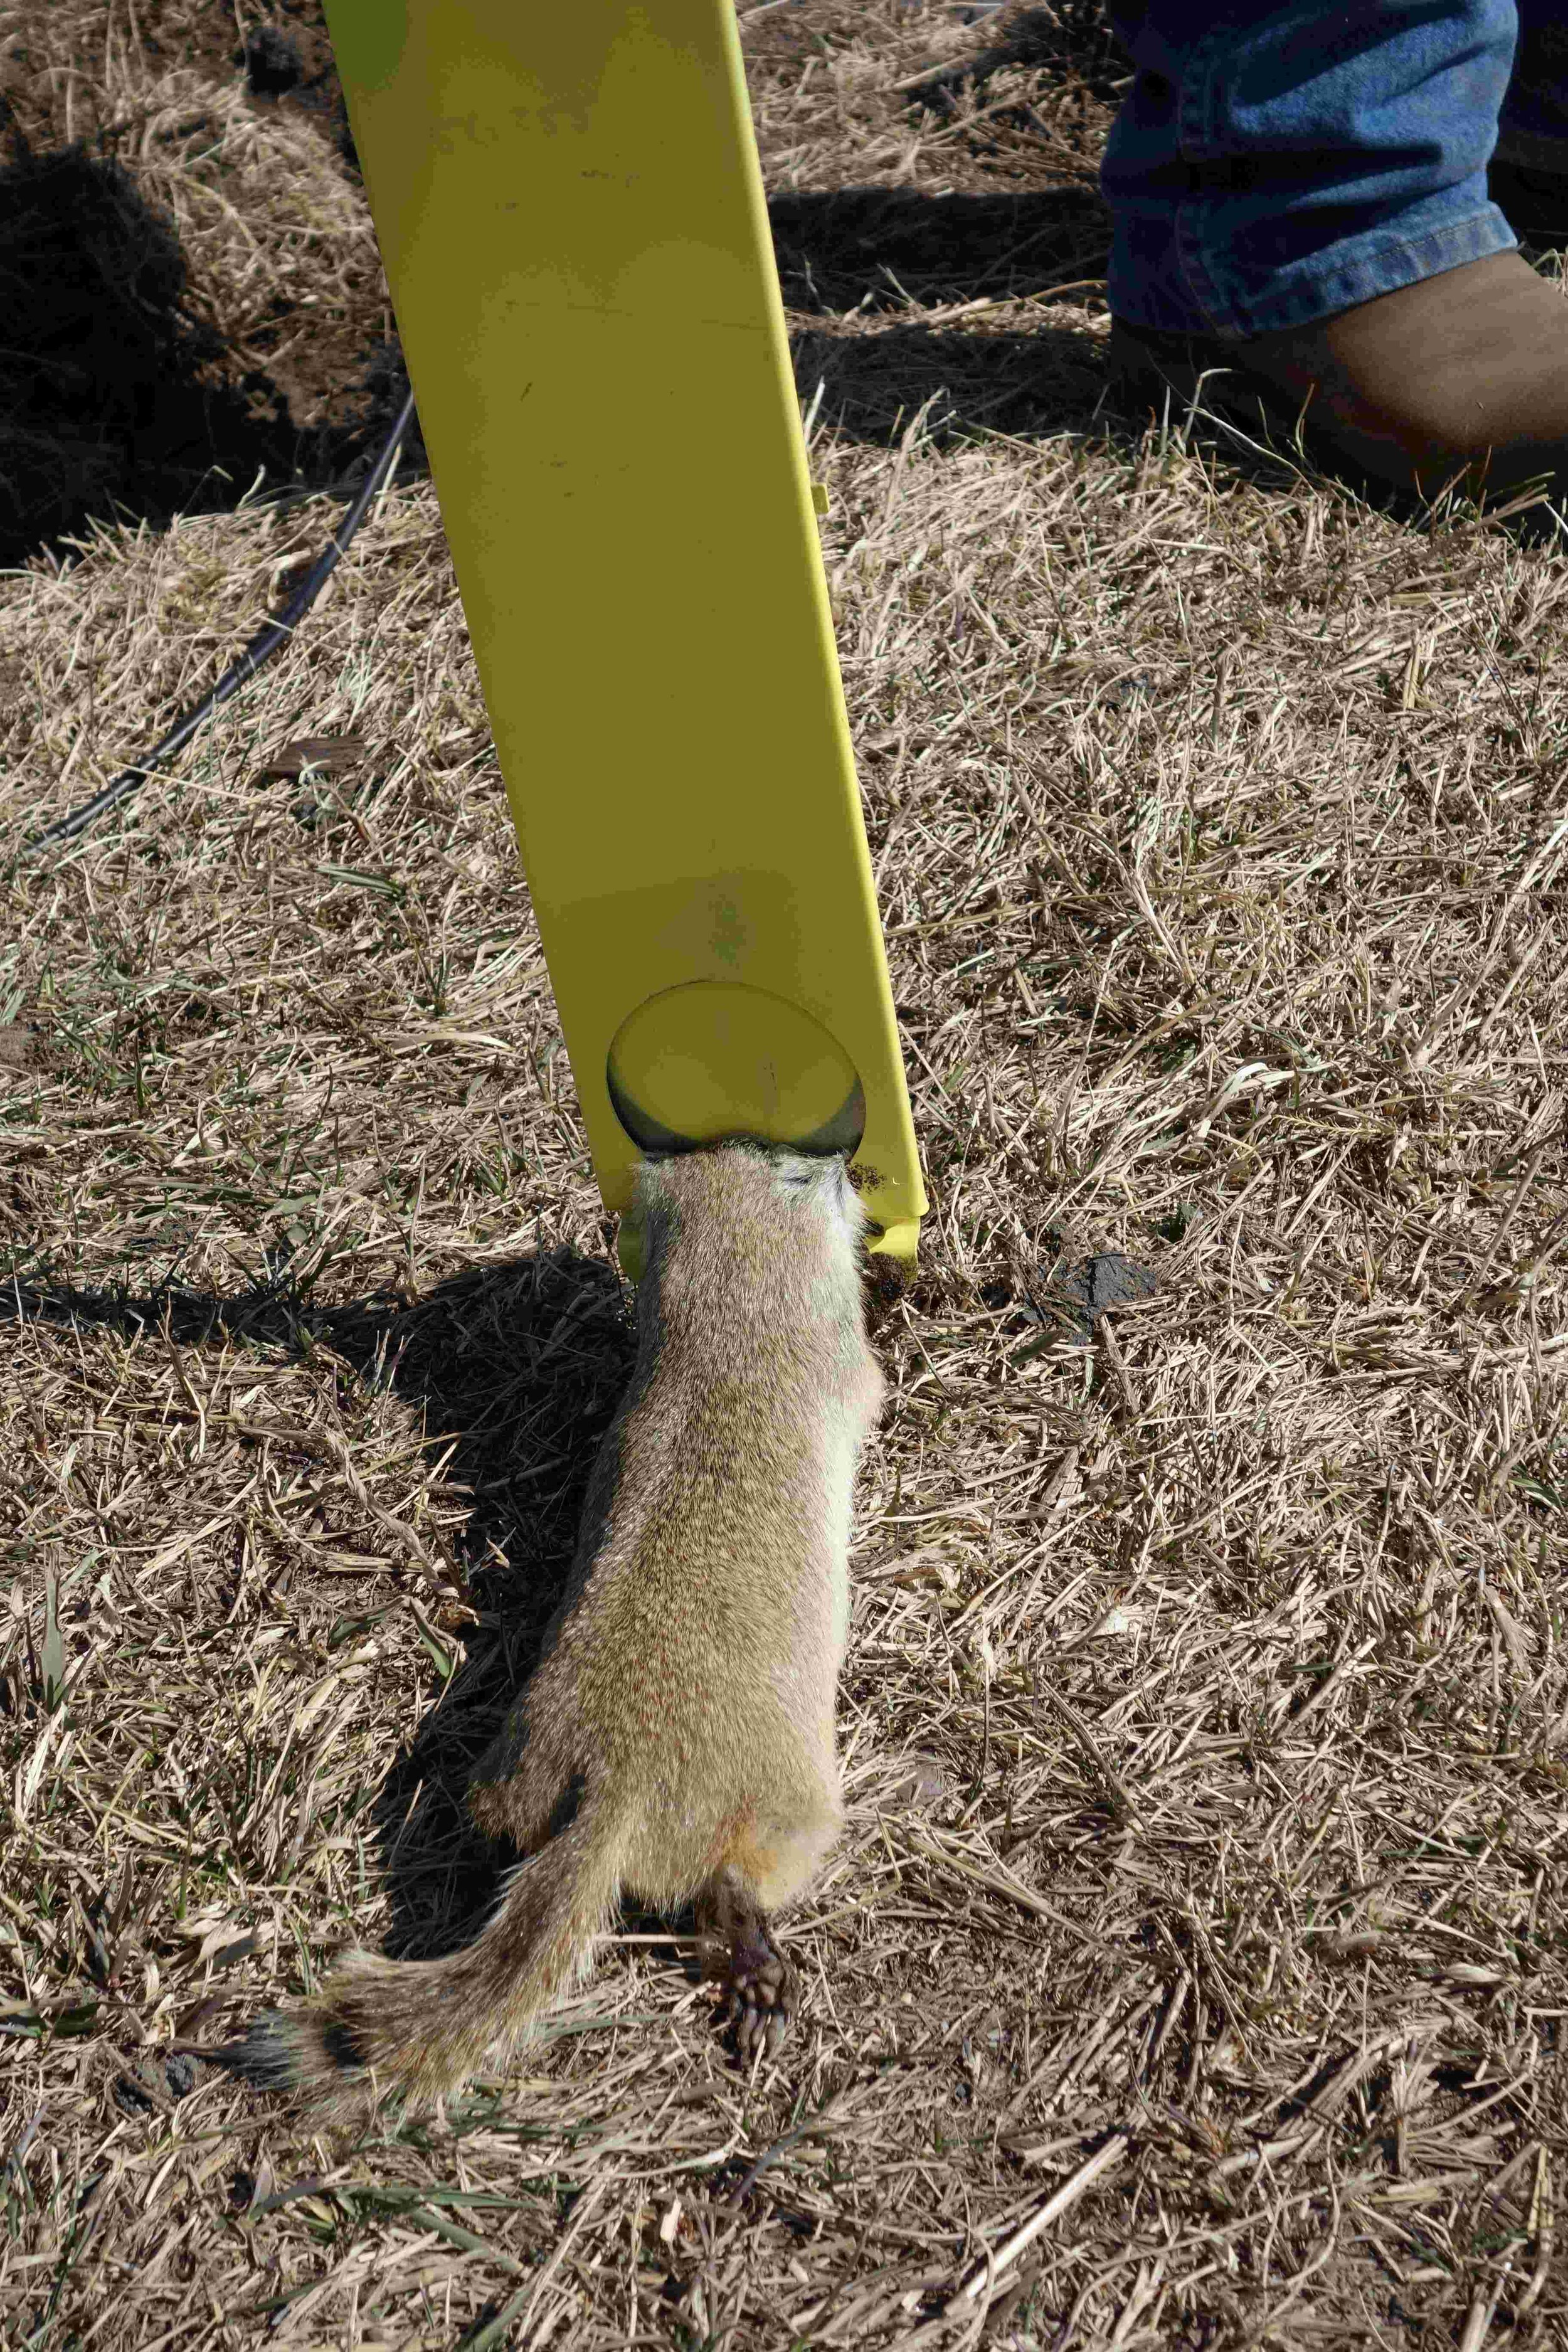 Gopher caught in a trap